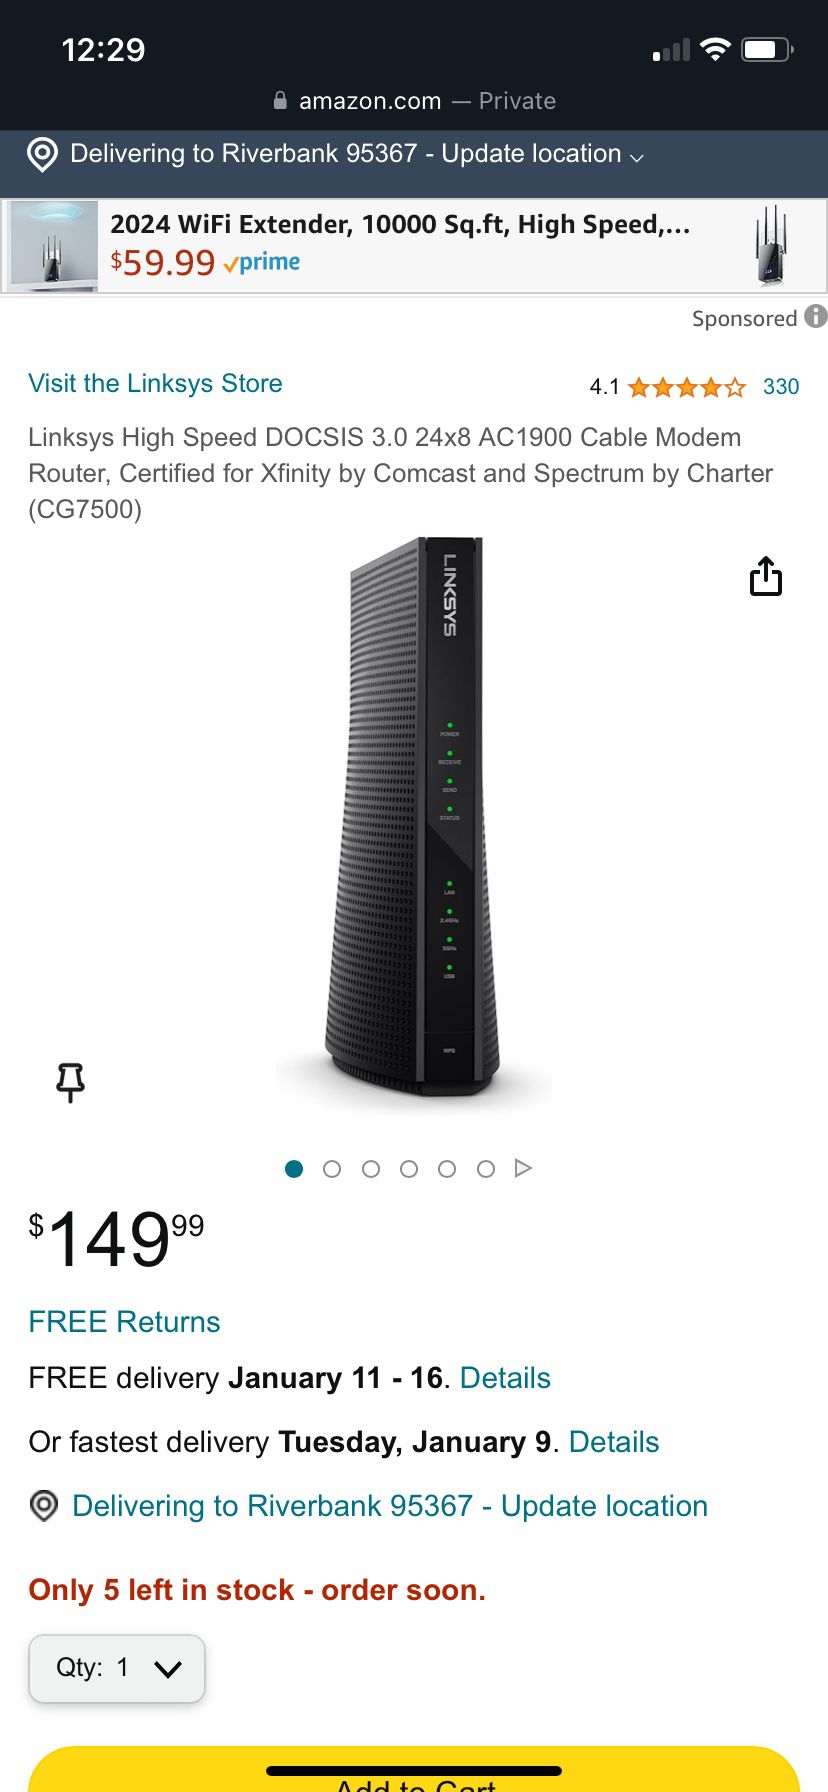 Linksys CG7500 Cable Modem Router